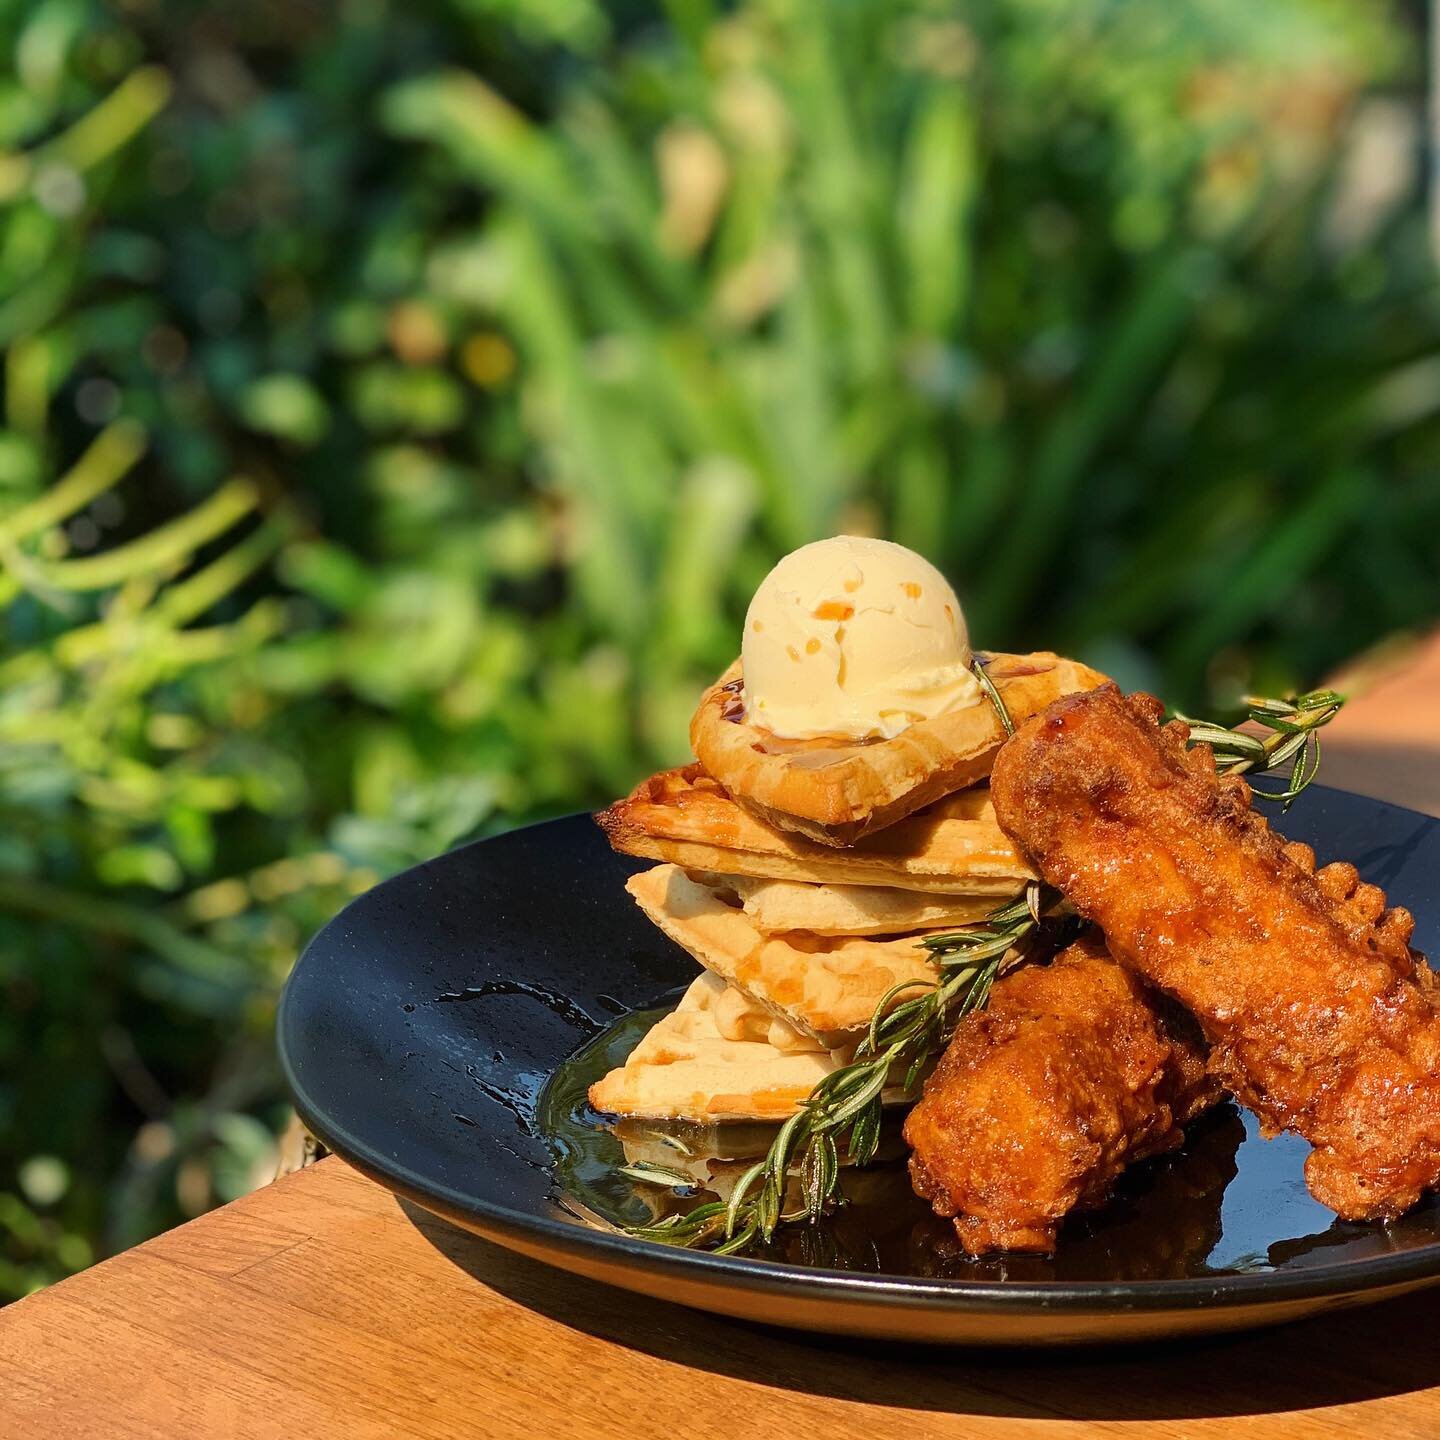 brunching till 3 🥂 can&rsquo;t get enough of these vegan NOT chicken &amp; waffles!
.
brunch menu 10-3 &bull; join us on the patio or pick-up curbside!
.
#OpenForBusiness #PatioDining #OpenForTakeout #CurbsidePickUp #exploremidtown #sacramento365 #s